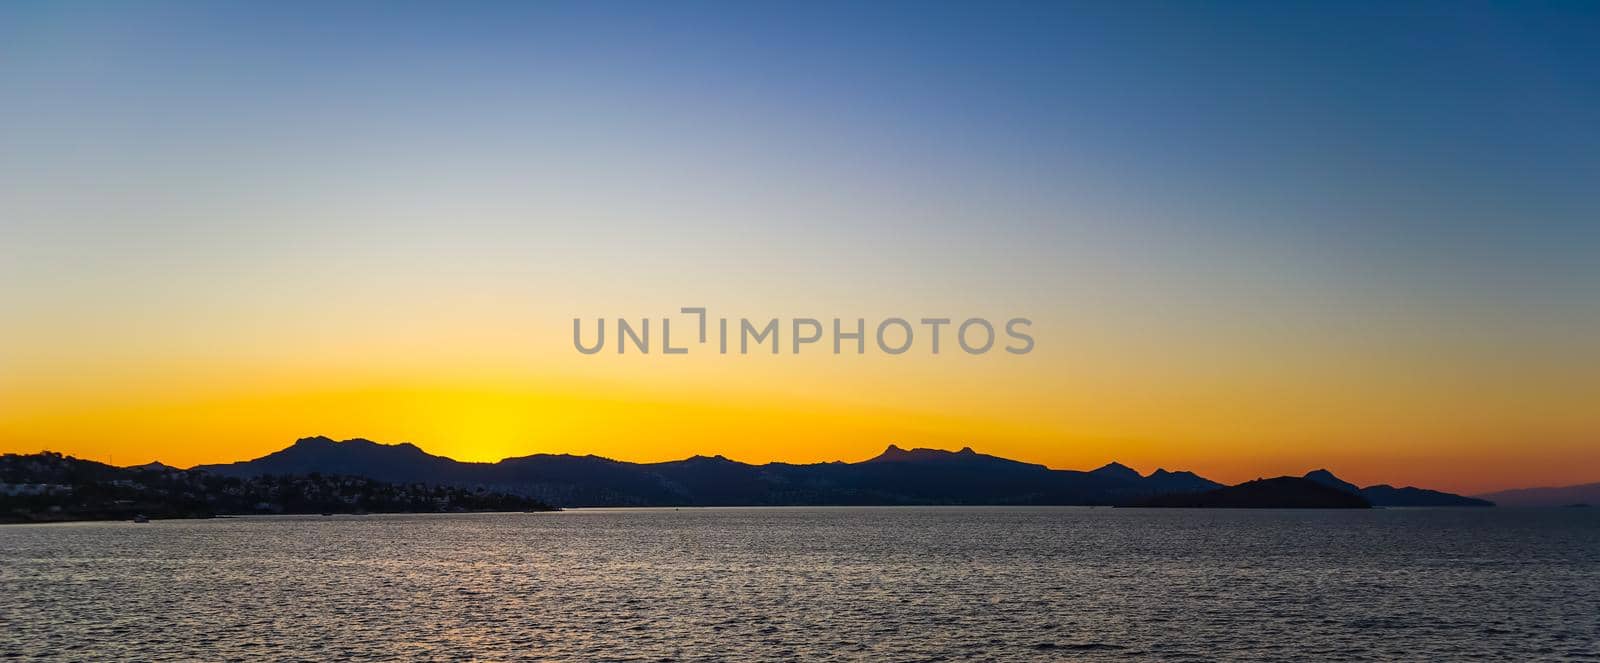 Beautiful bright colorful sunset on the Mediterranean Sea with islands, mountains and boats